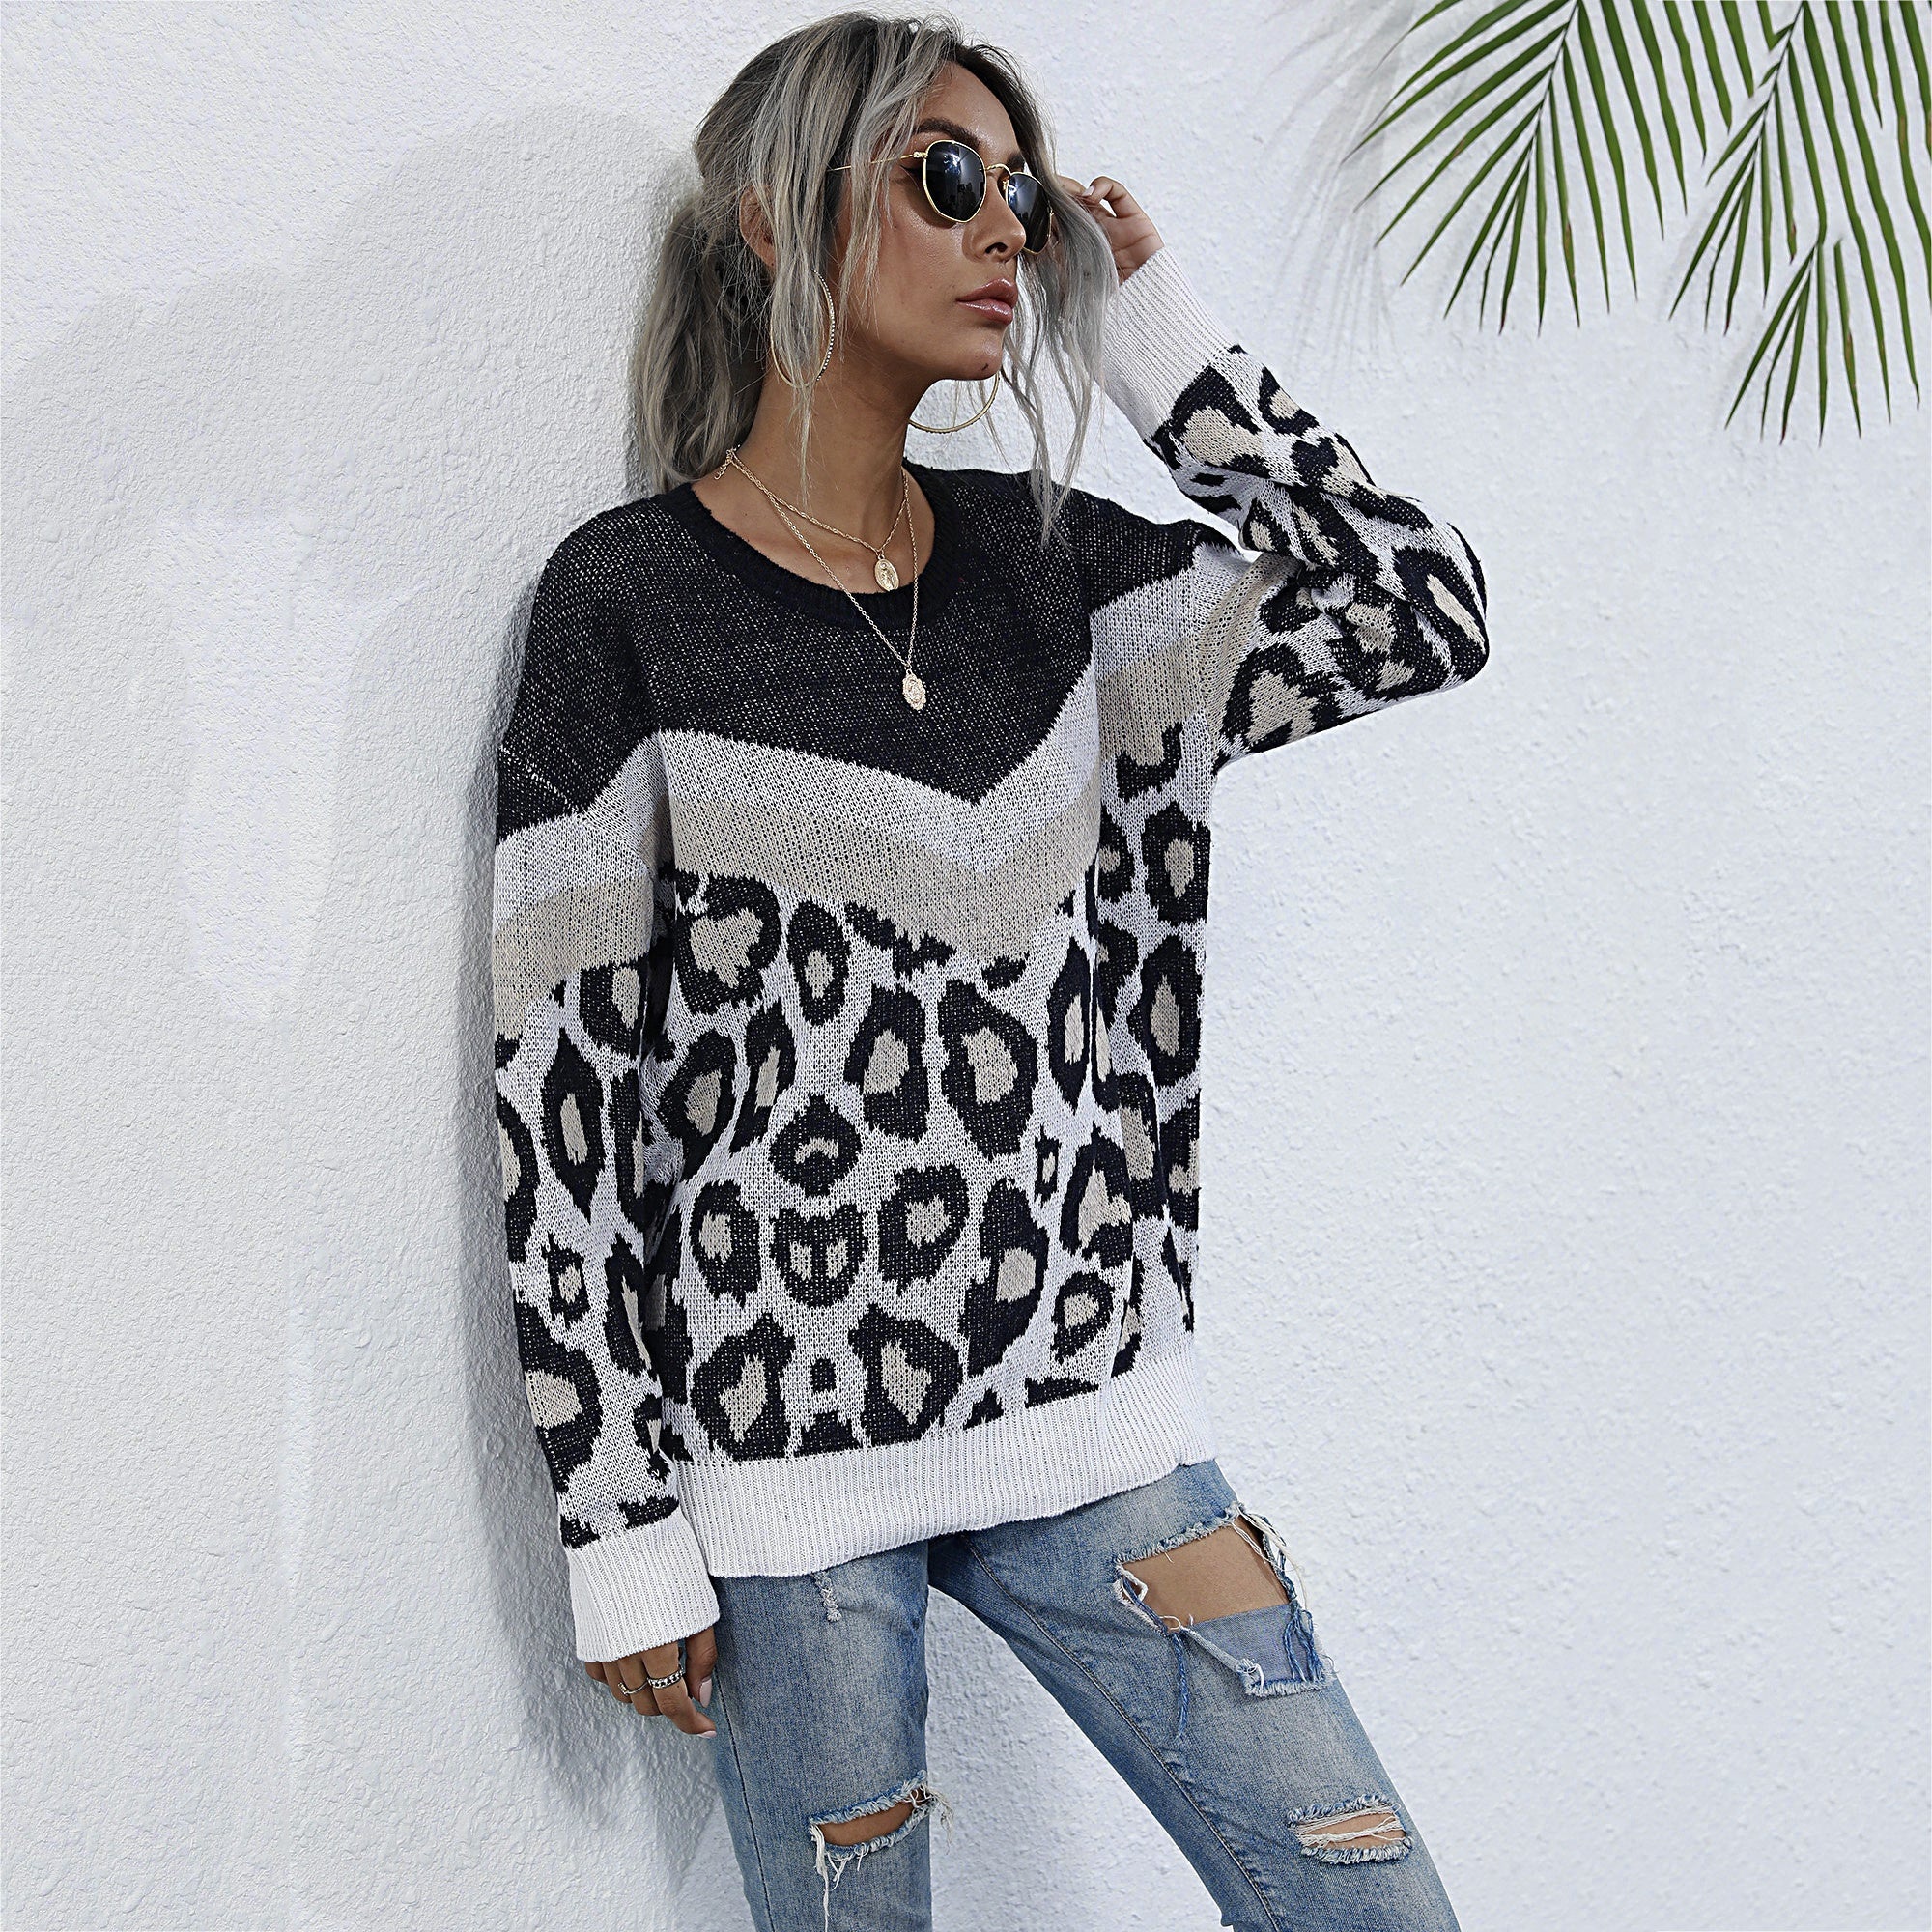 Leopard Printed Long Sleeve Loose Sweater Women O-neck Mid-length Knitted Pullover Sai Feel